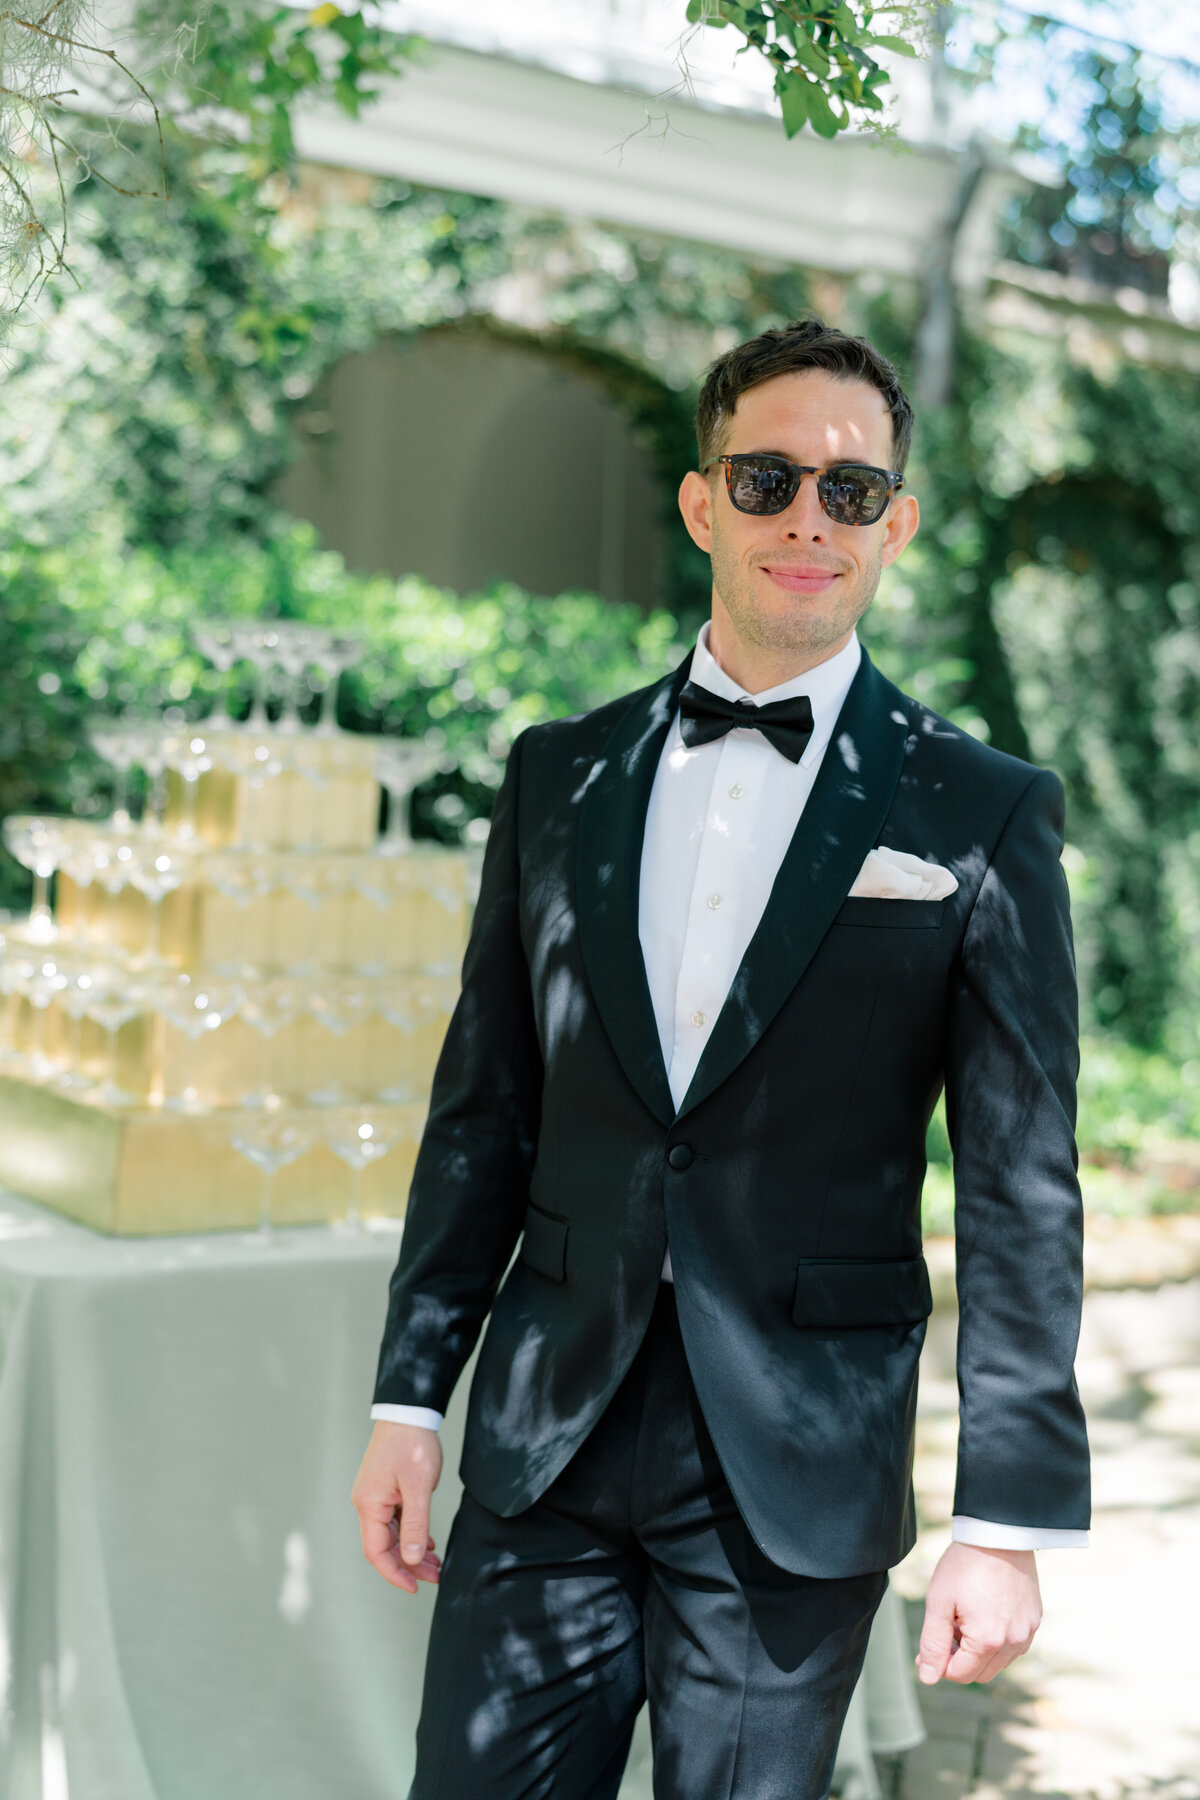 Candid photo of the groom on wedding day. Groom in sunglasses and tuxedo